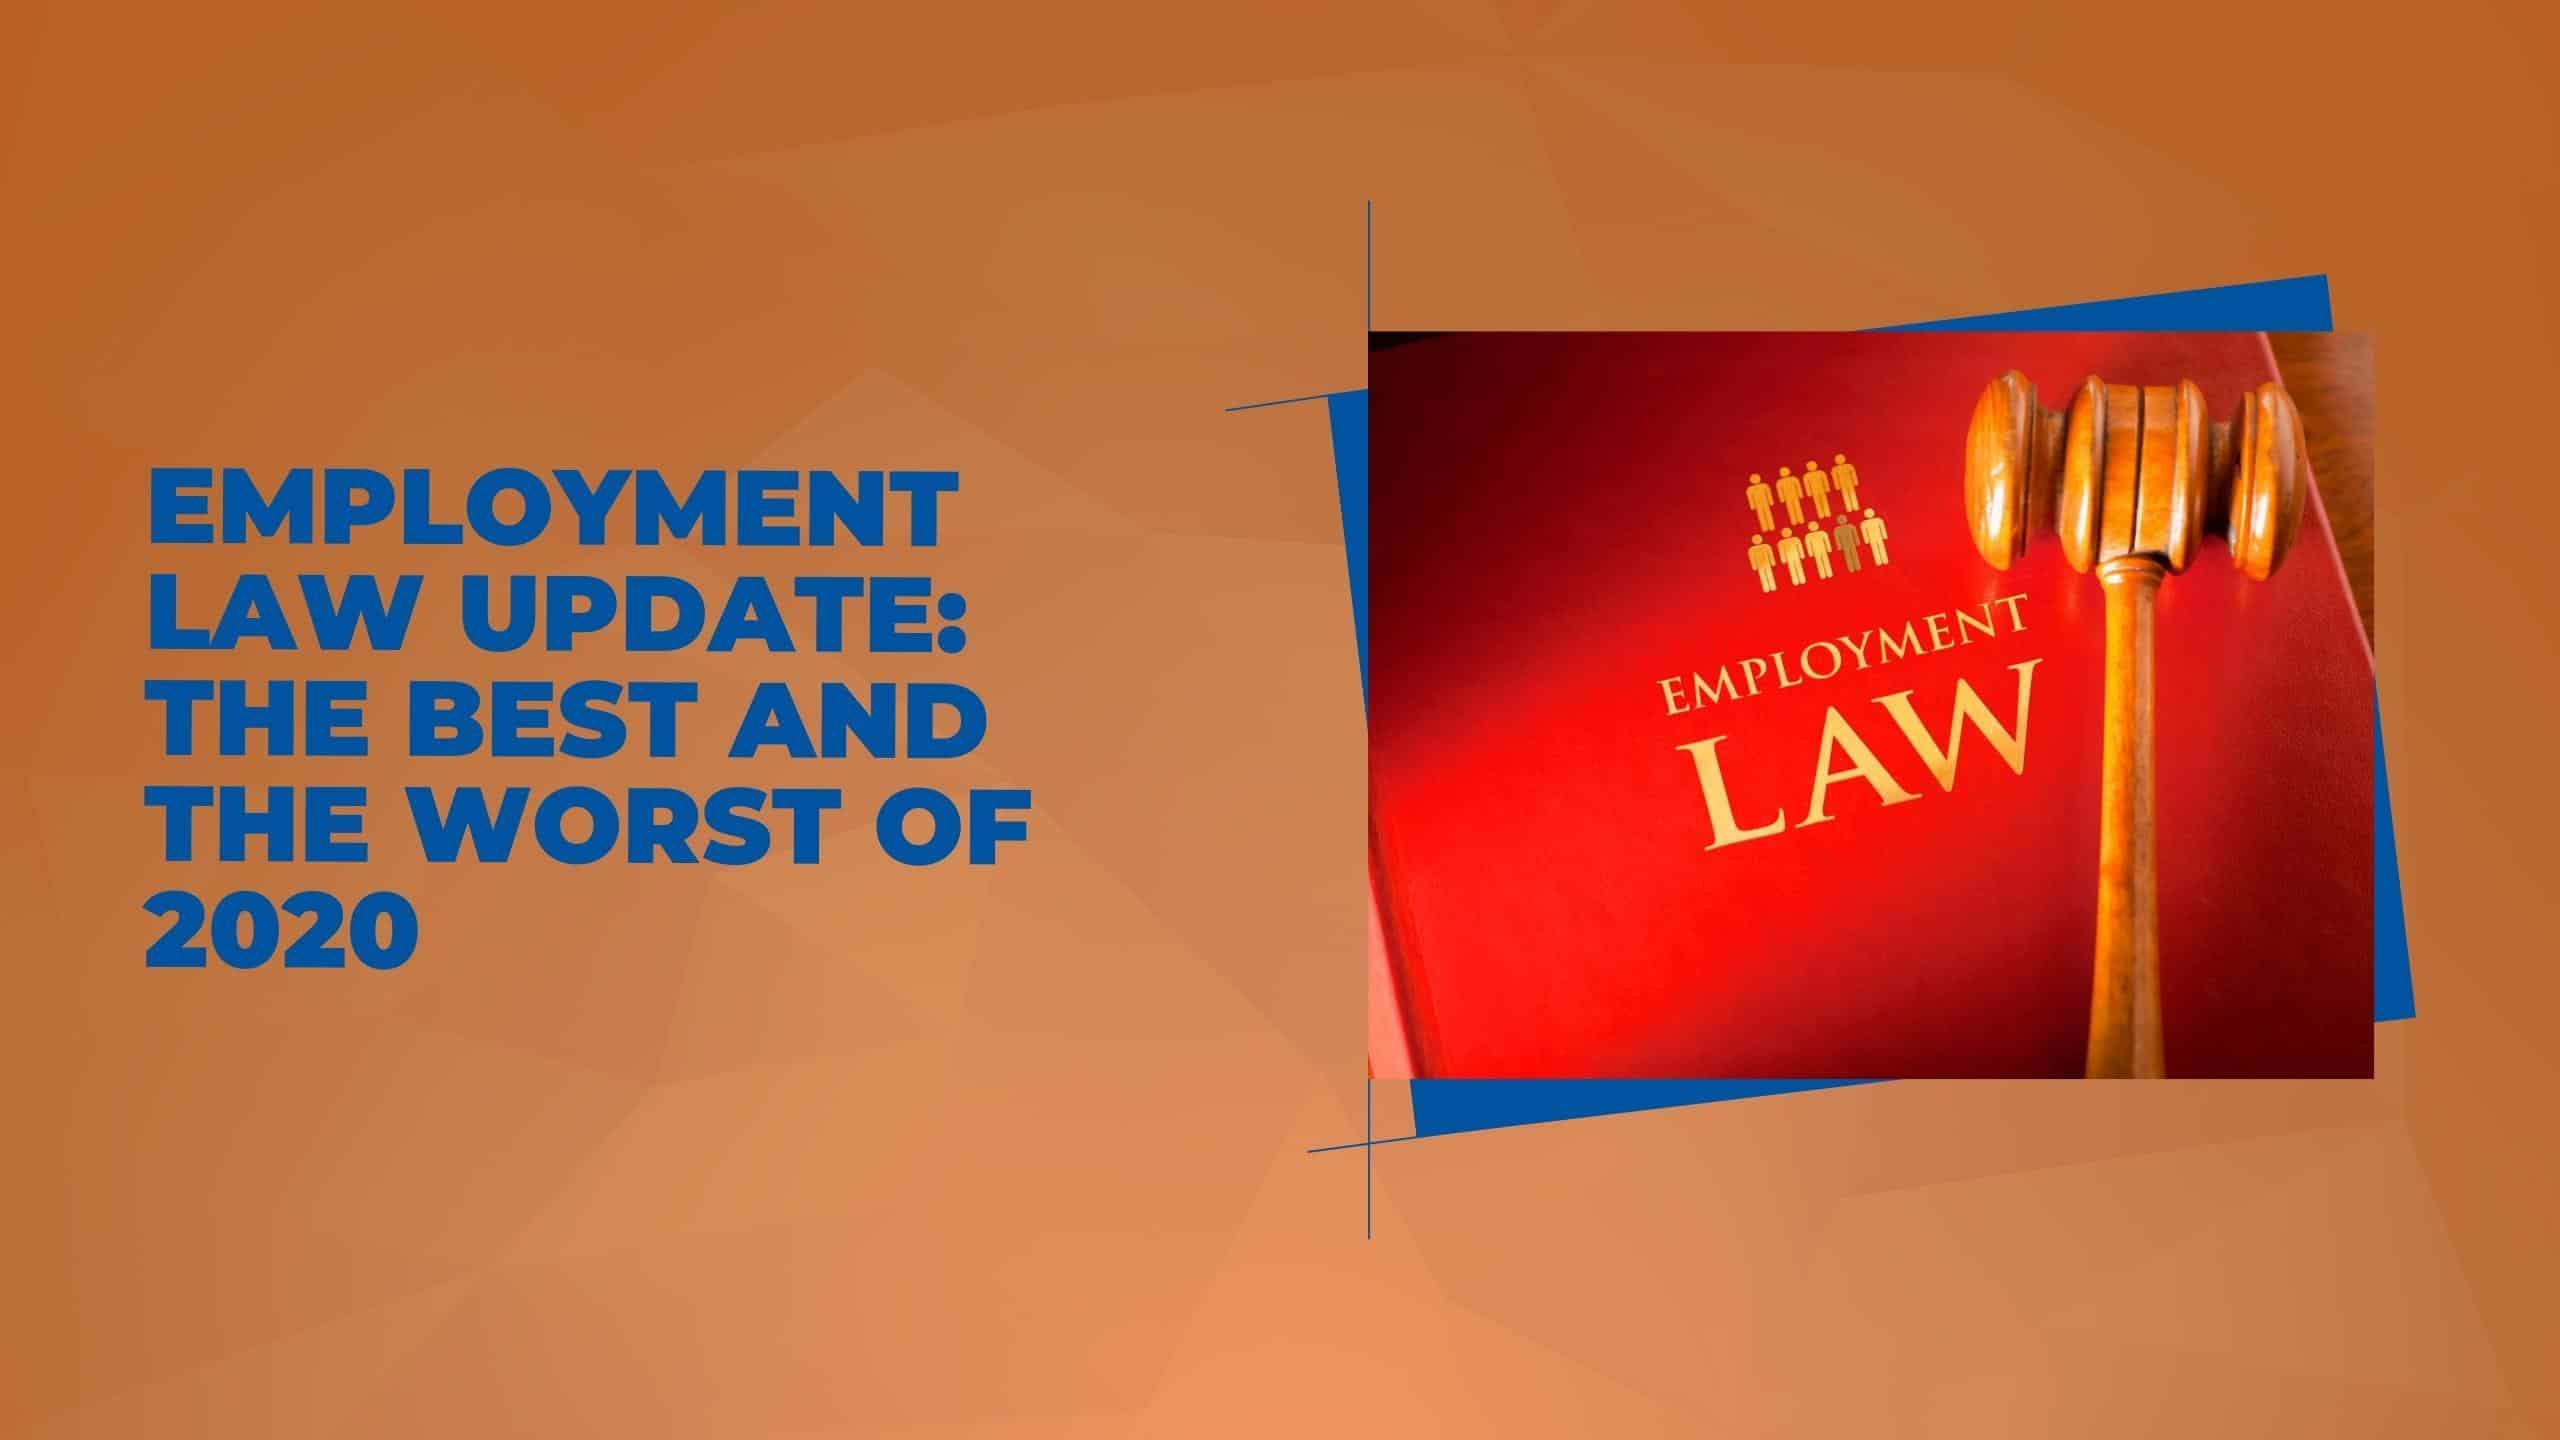 Employment Law Update: The Best and the Worst of 2020